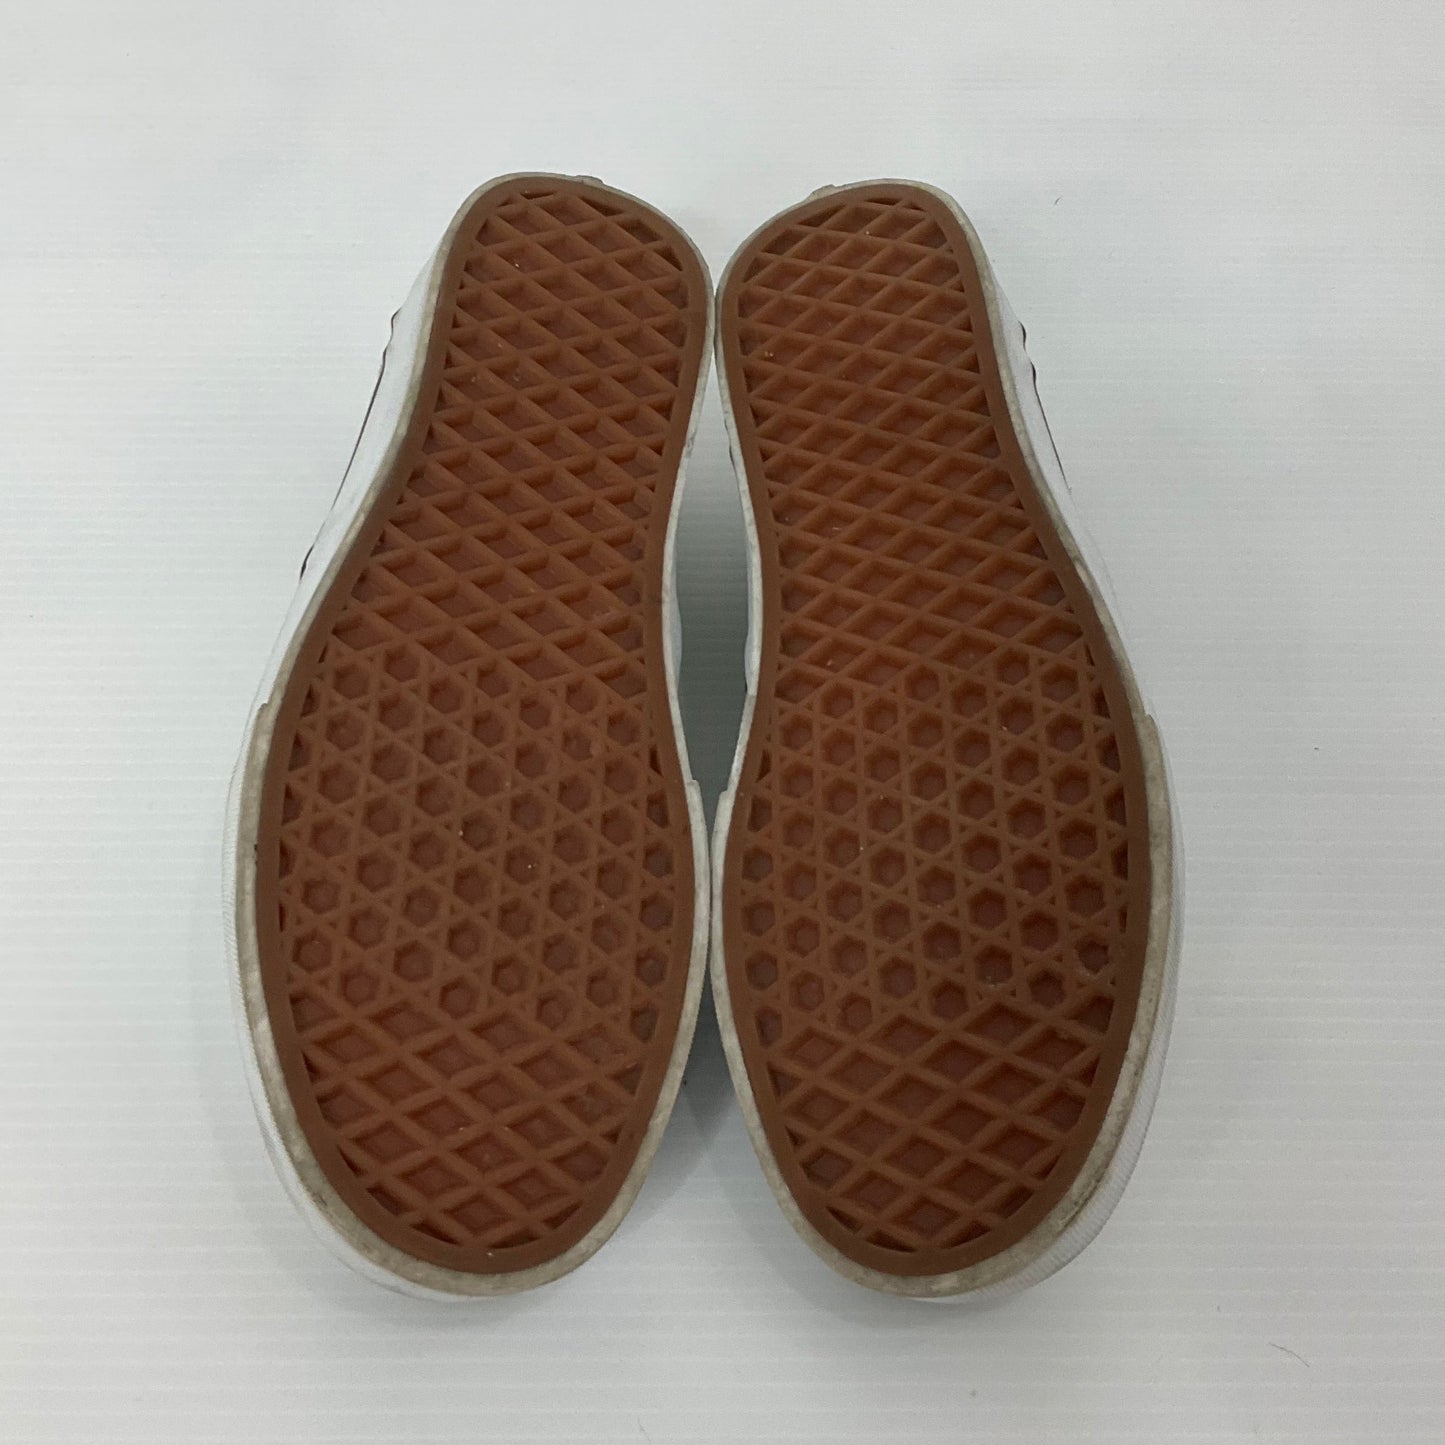 Checkered Pattern Shoes Flats Vans, Size 7